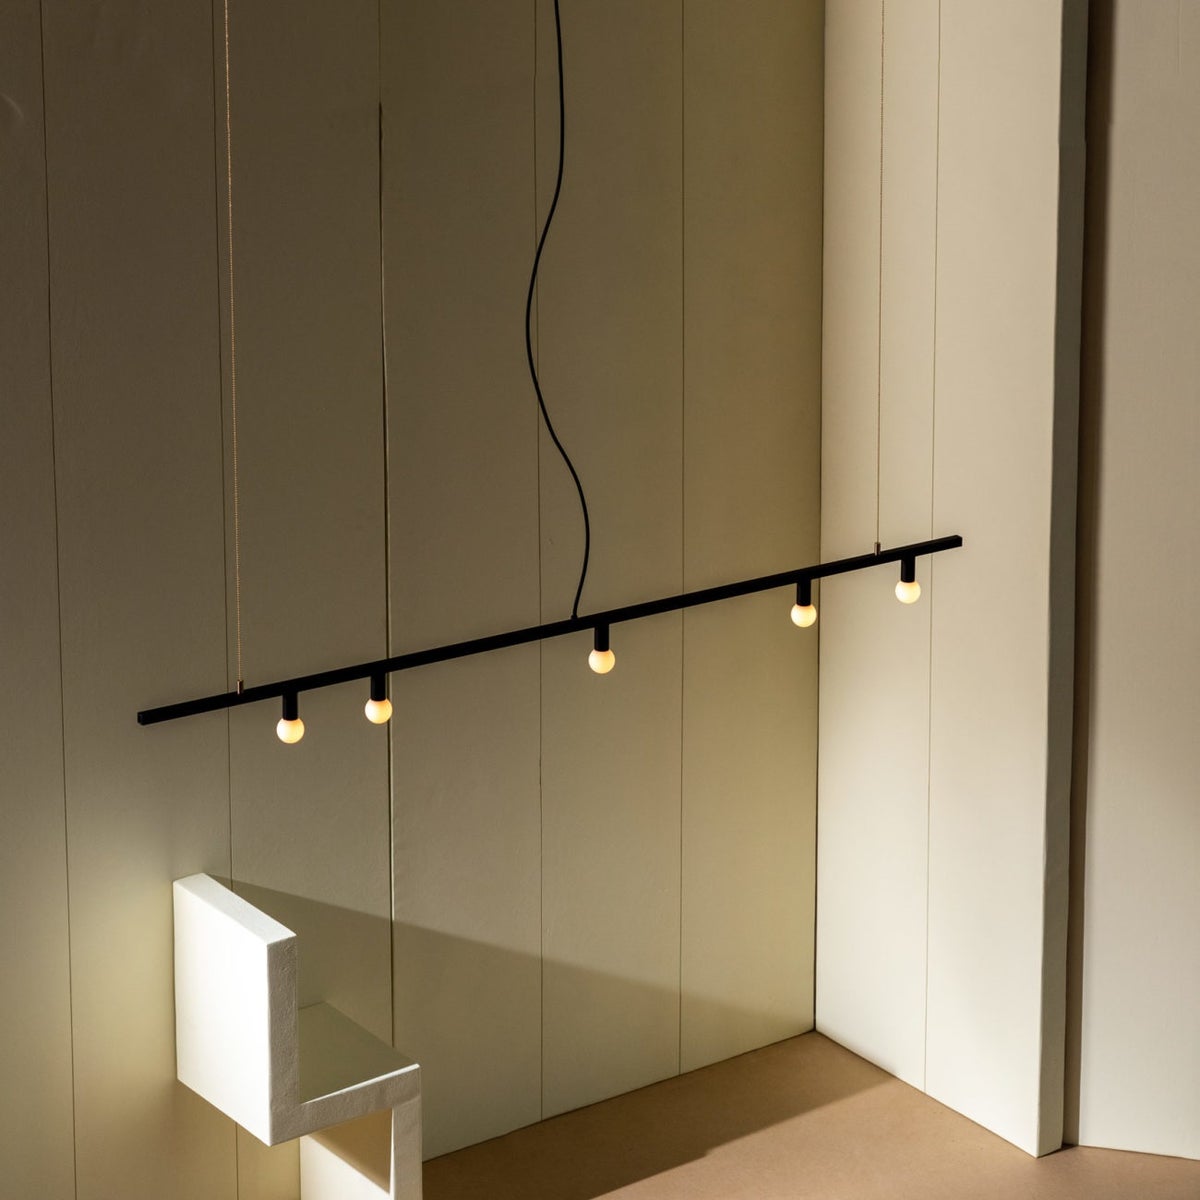 Black linear light with five lit bulbs against a beige background